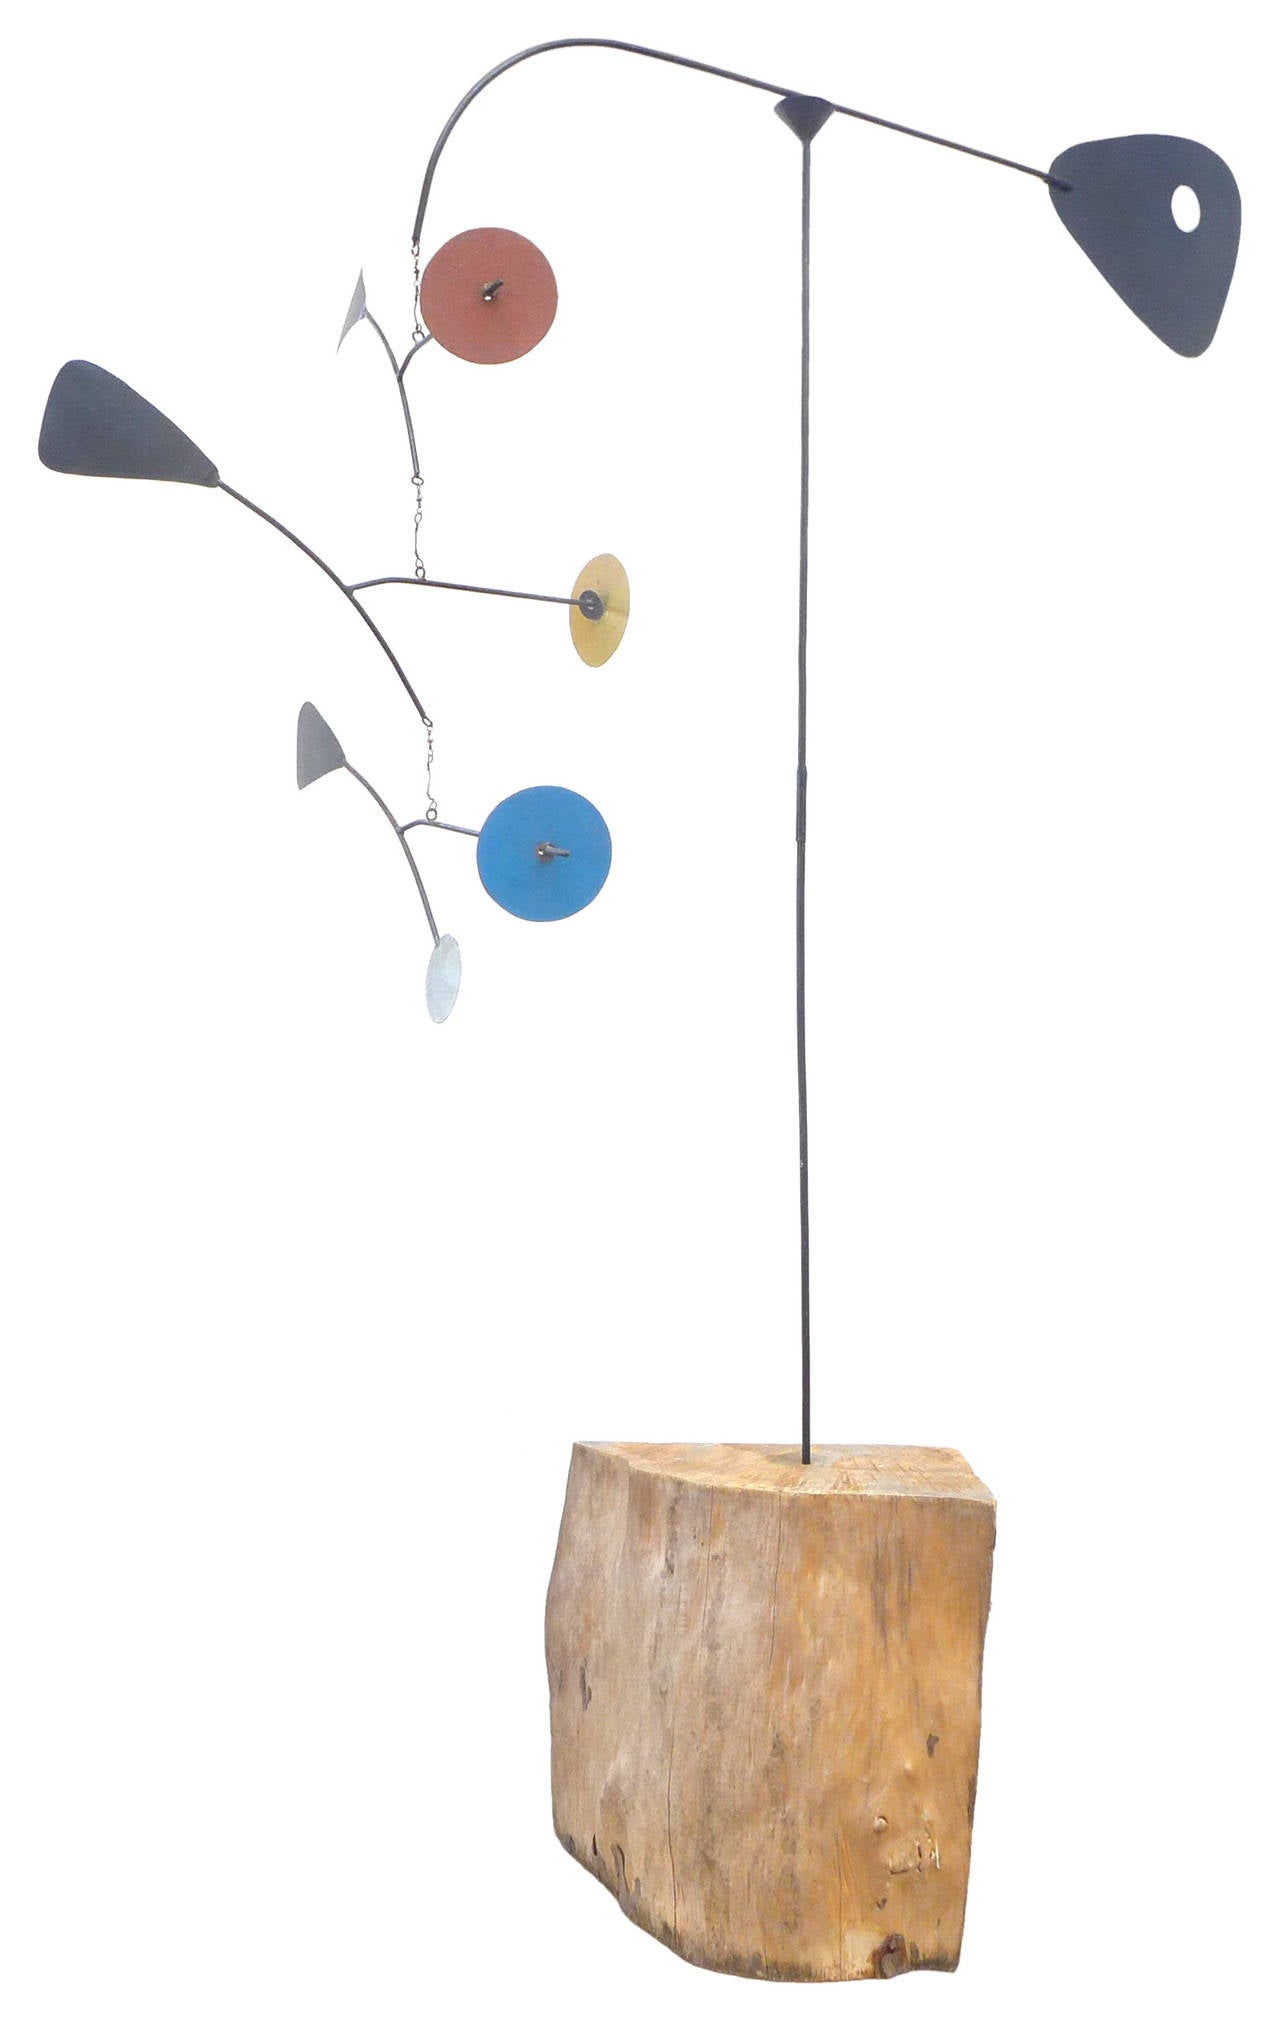 A spectacular, completely handcrafted standing mobile of great scale and execution. In the spirit of Calder, a beautifully balanced piece with fantastic, warm colors and a much-desired patina throughout. Wonderful details including a perforated